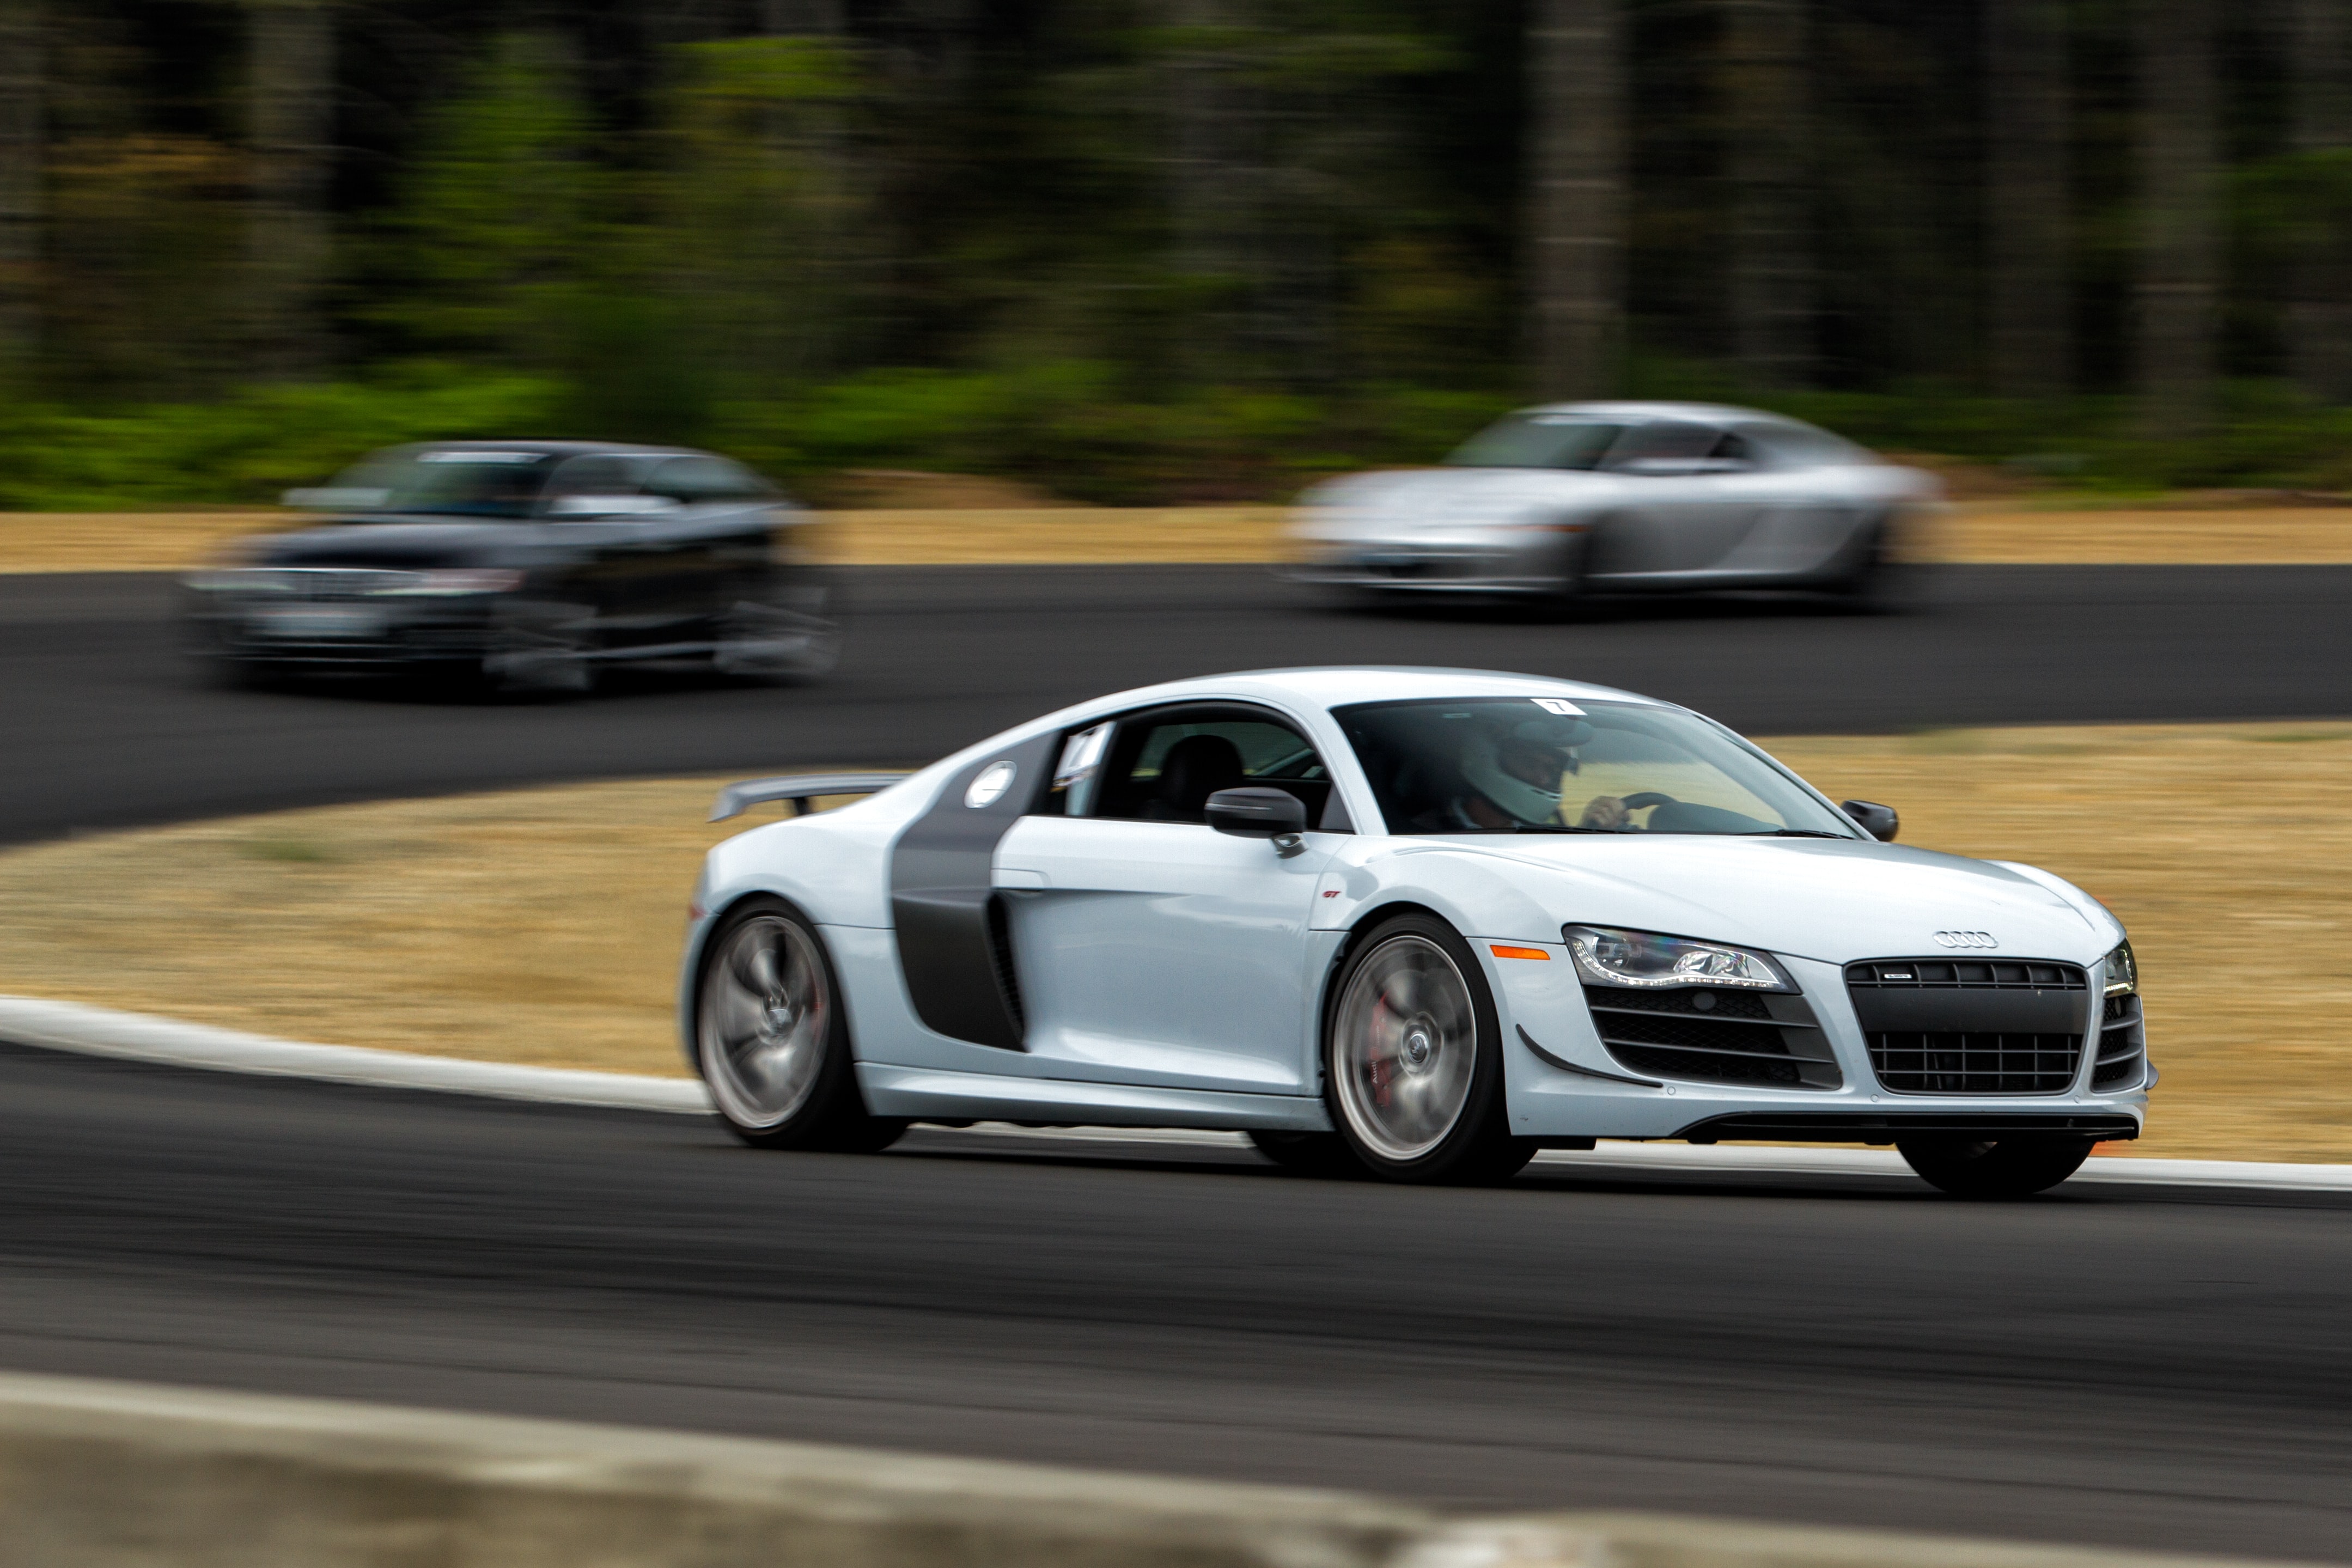 white audi racing other cars on track